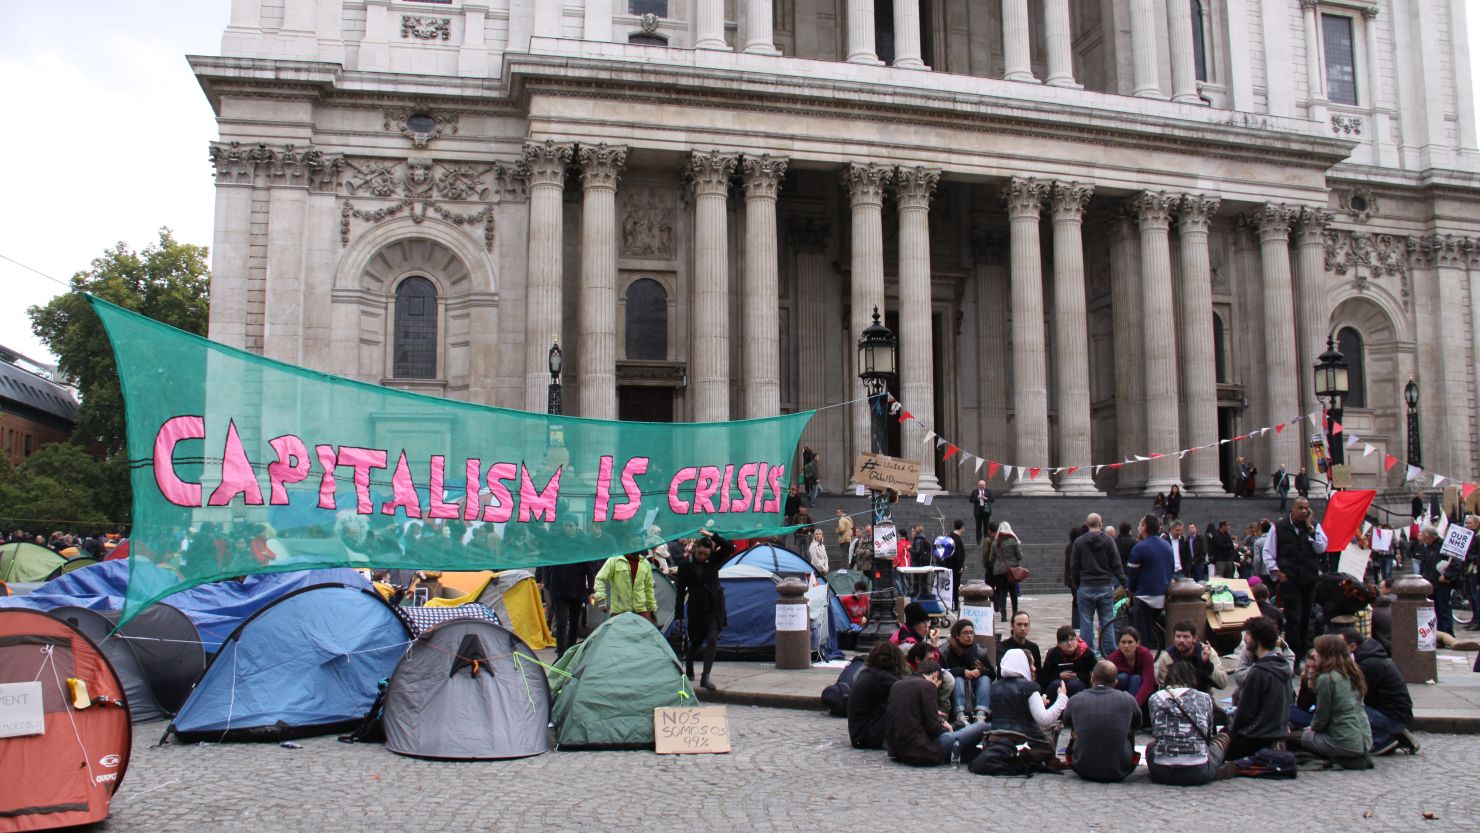 The Occupy London Stock Exchange protest at St Paul's Cathedral